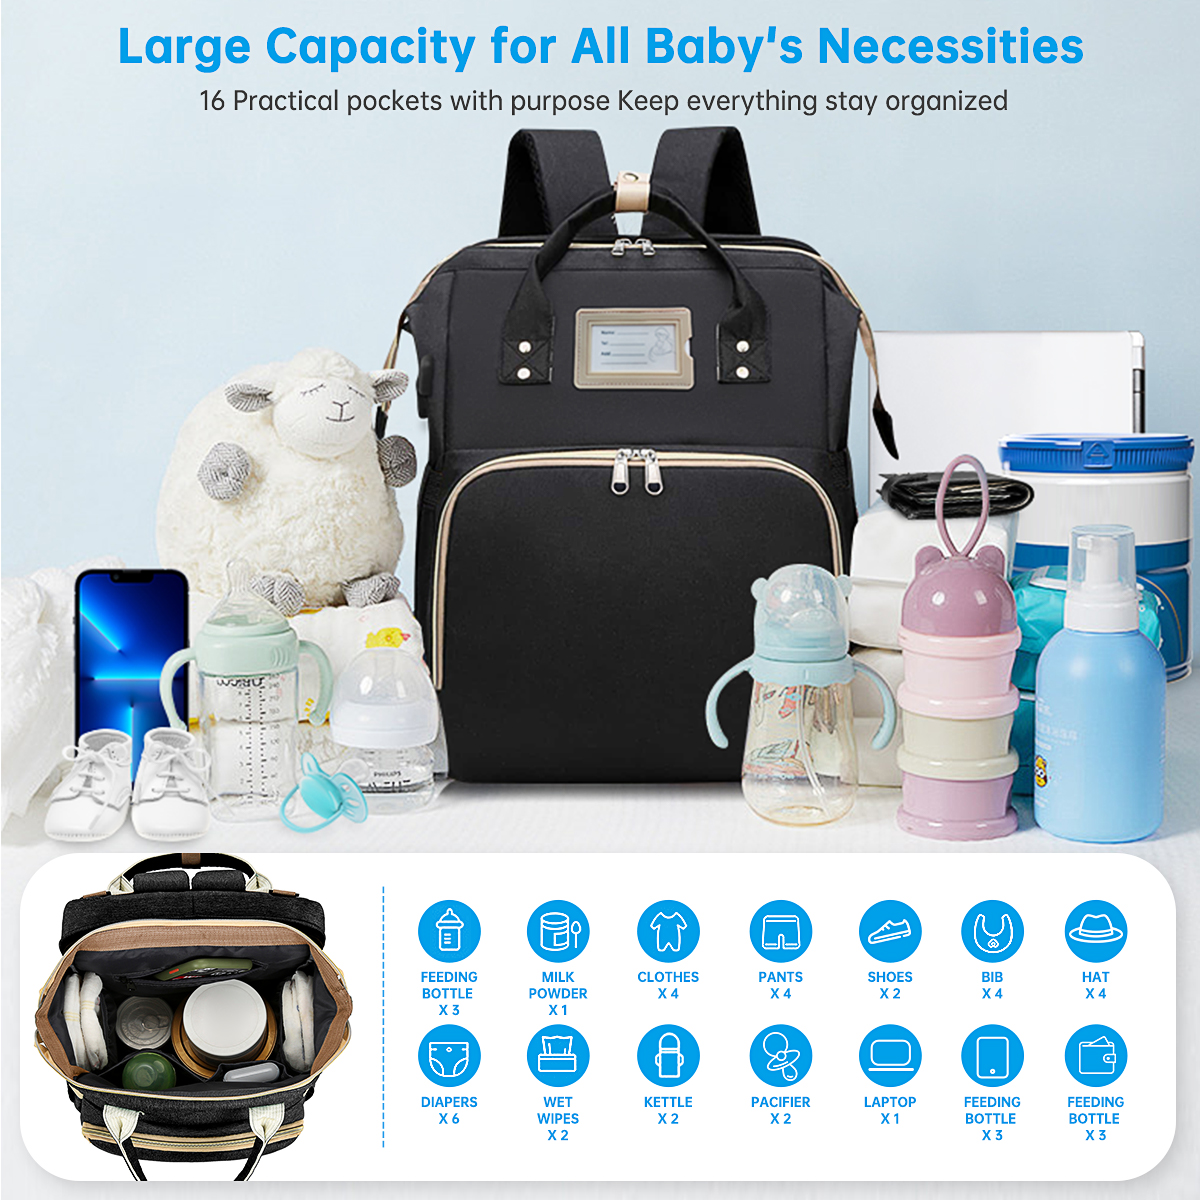 Diaper Bag Backpack, Multifunctional Baby Changing Bag with Foldable Crib & Insulated Milk Bottle Pocket, Large Capacity Travel Backpack with USB Charging Port & Stroller Strap (Black) - image 2 of 7